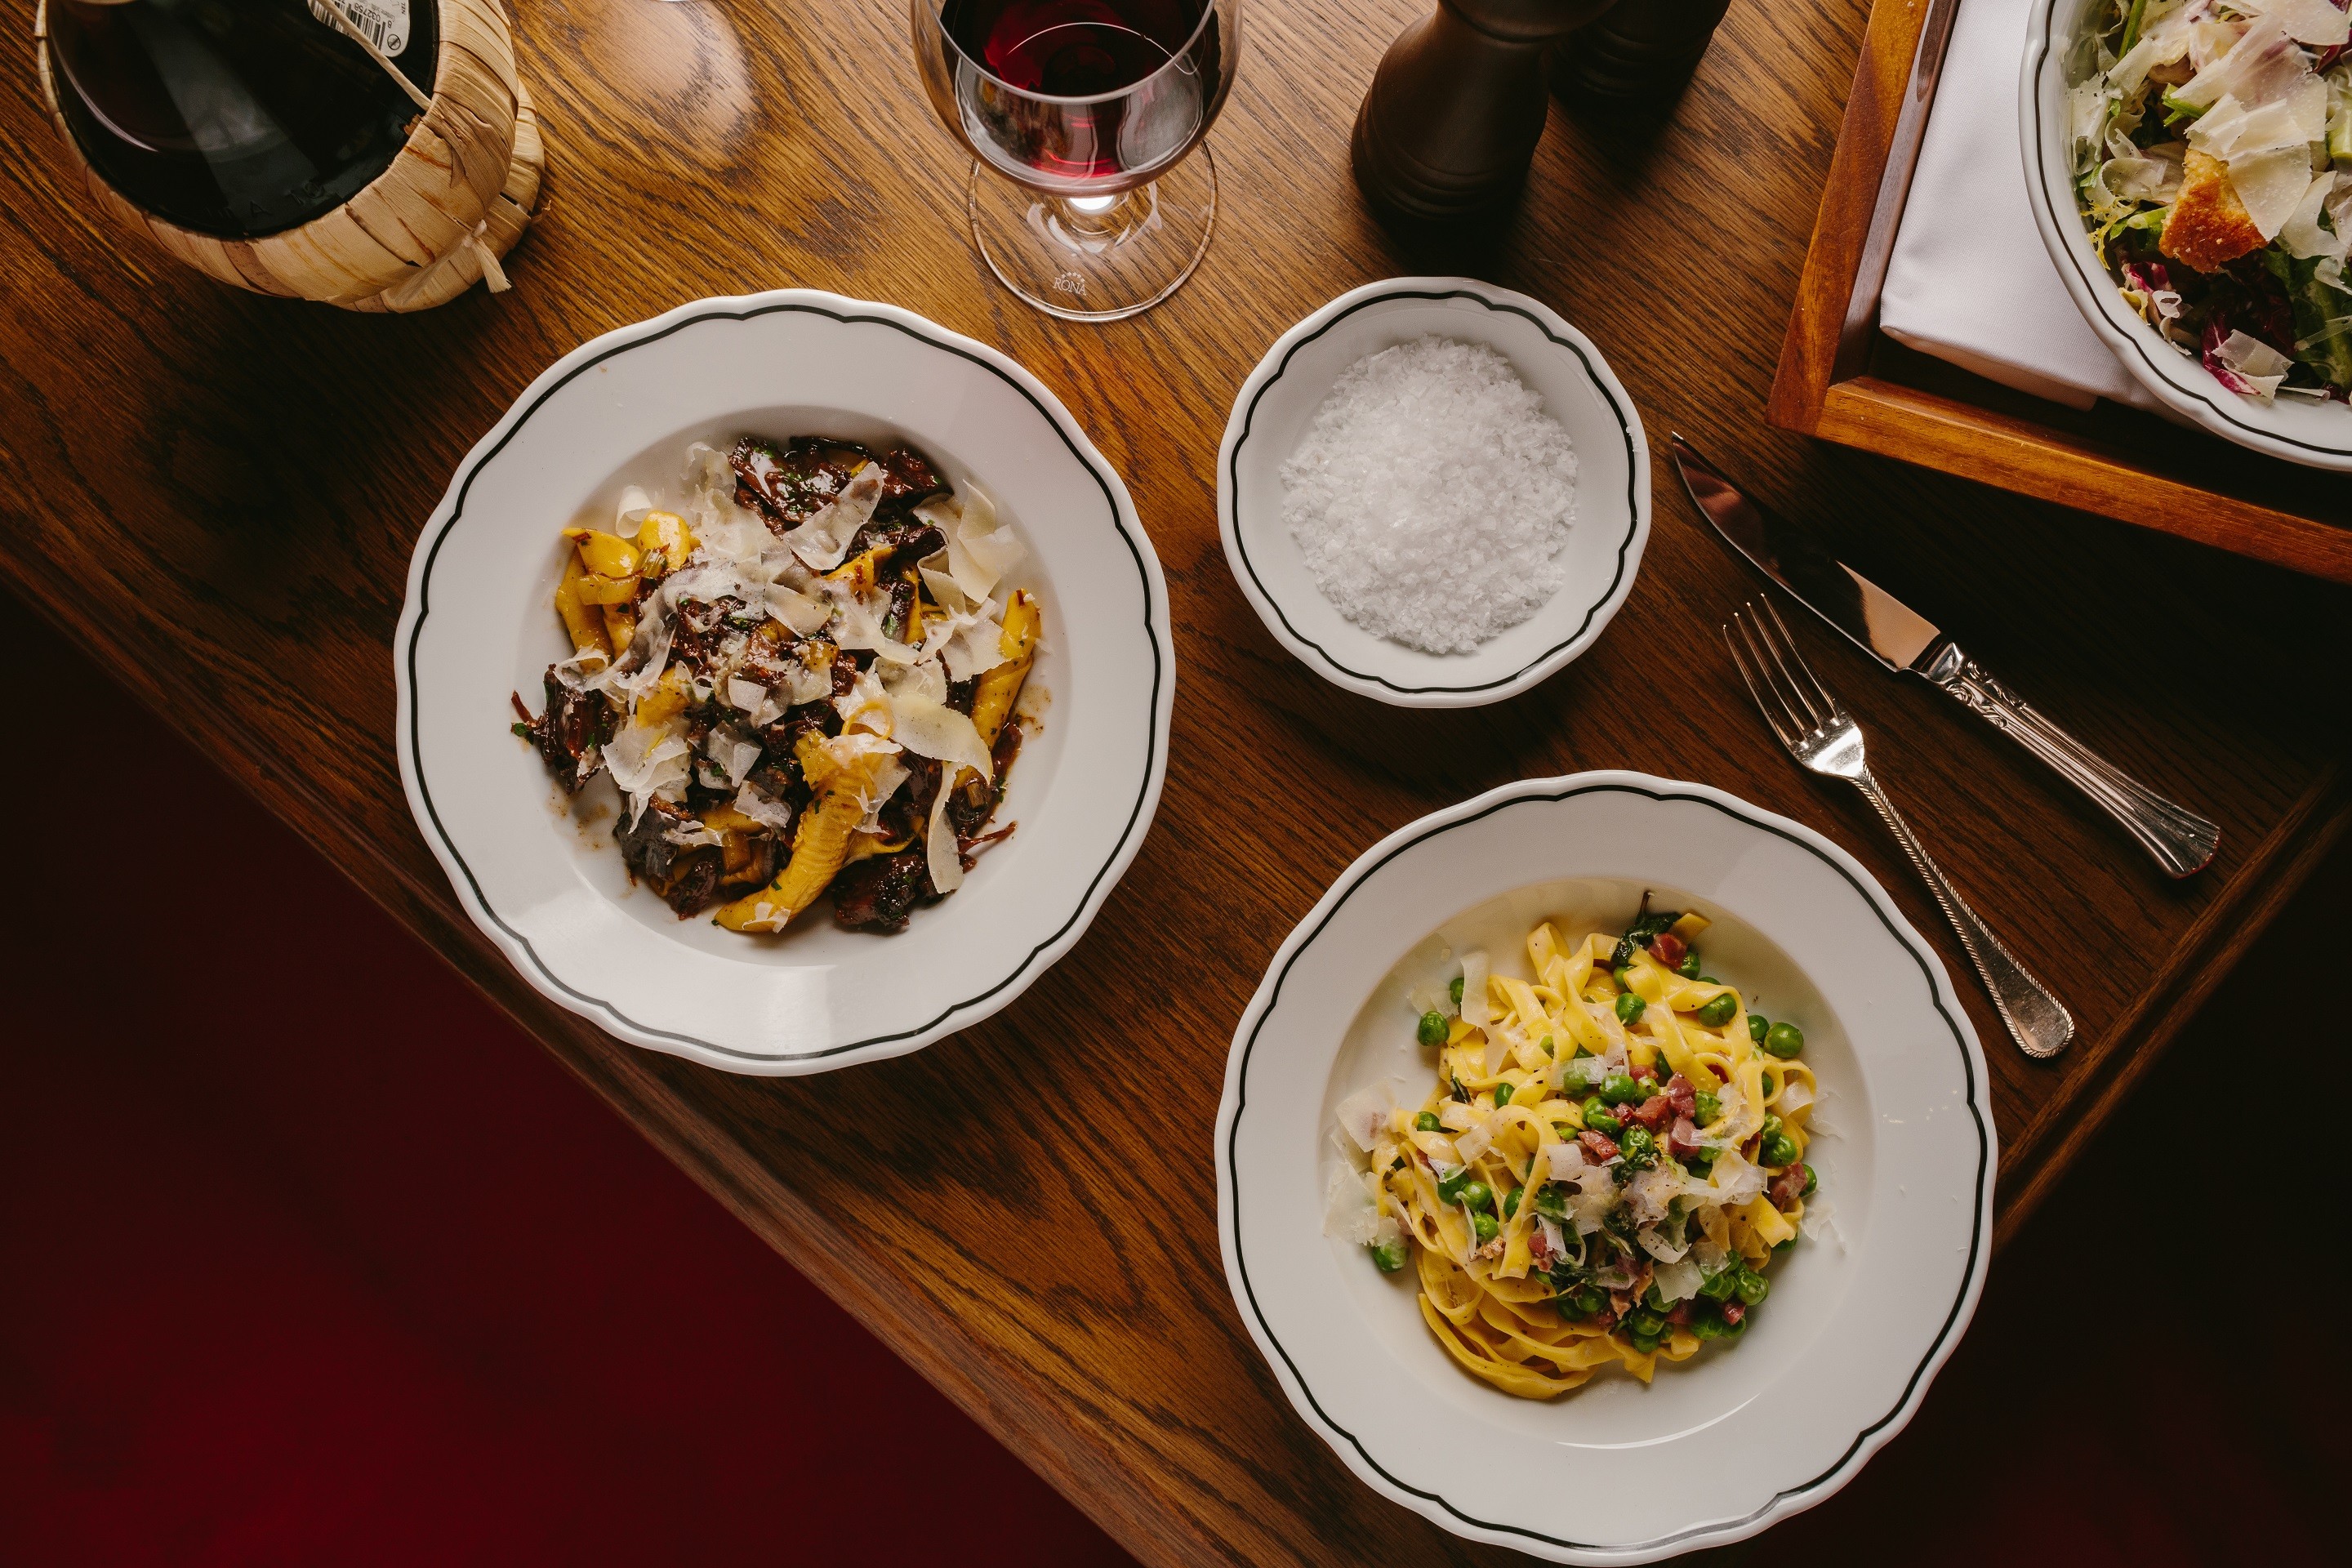 Several new restaurants are opening up this November, including the latest from Black Sheep Restaurants, Associazione Chianti.